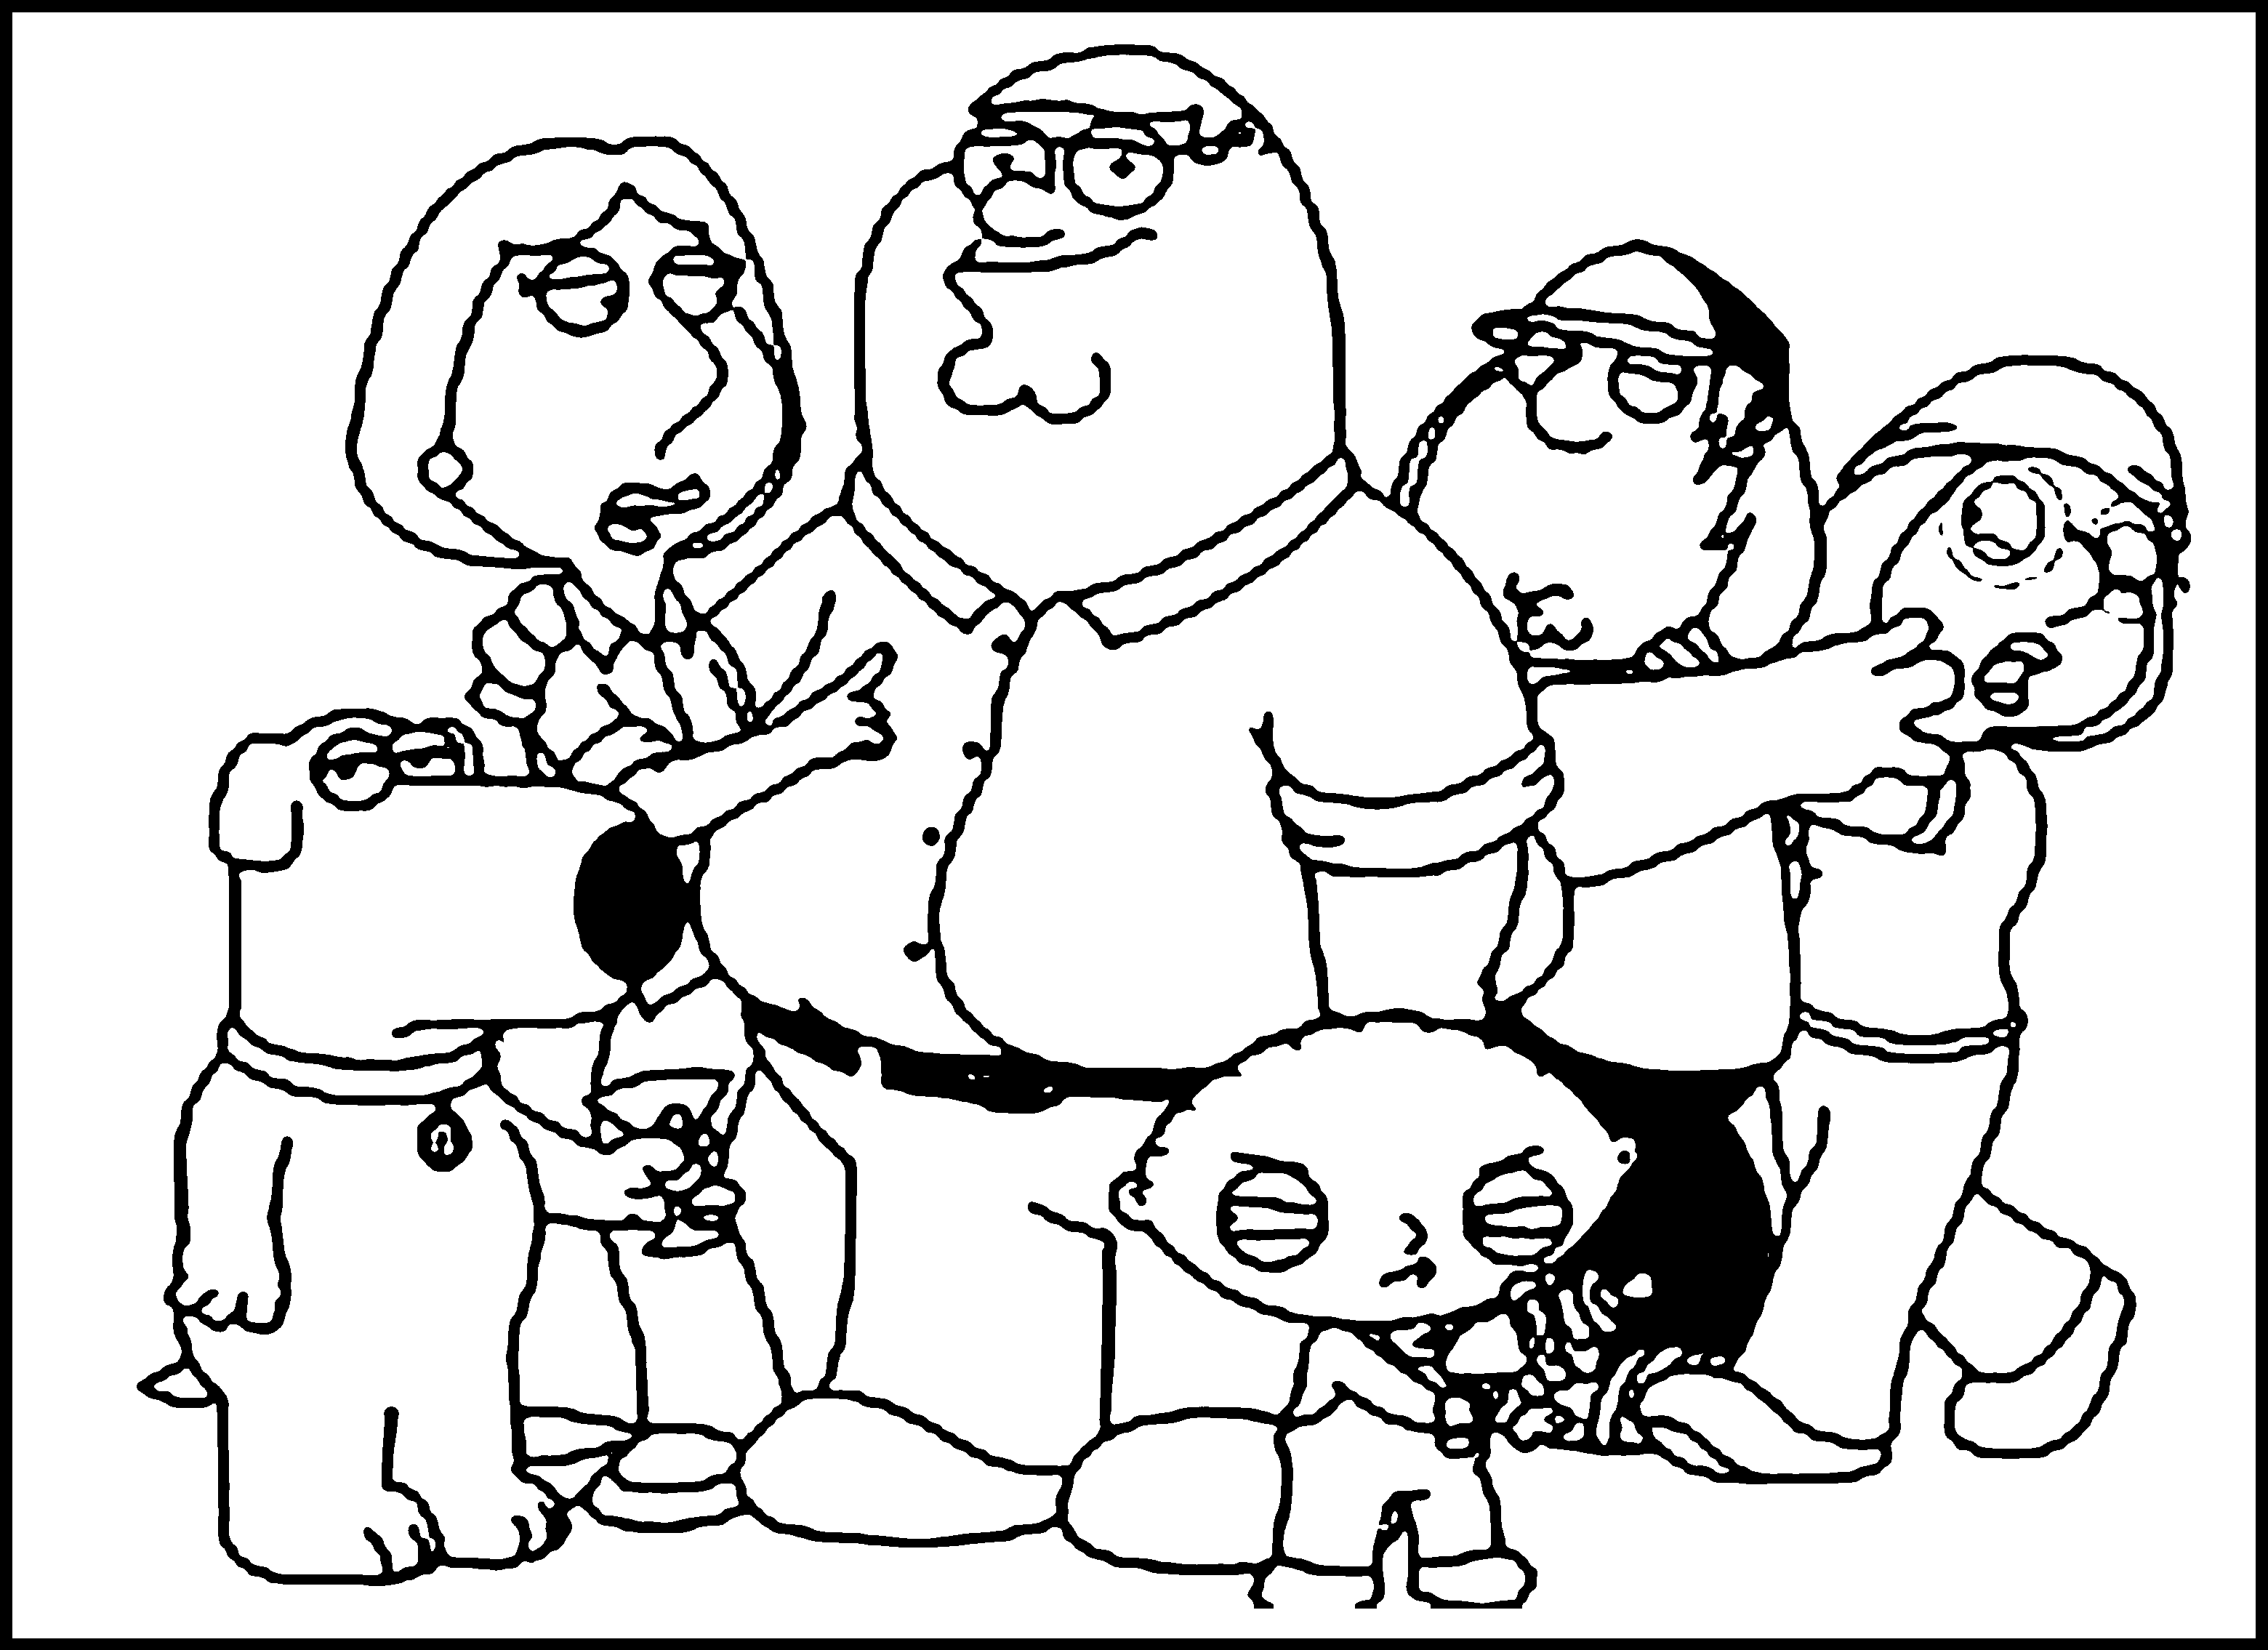 Of Family Guy | Coloring Pages for Kids and for Adults